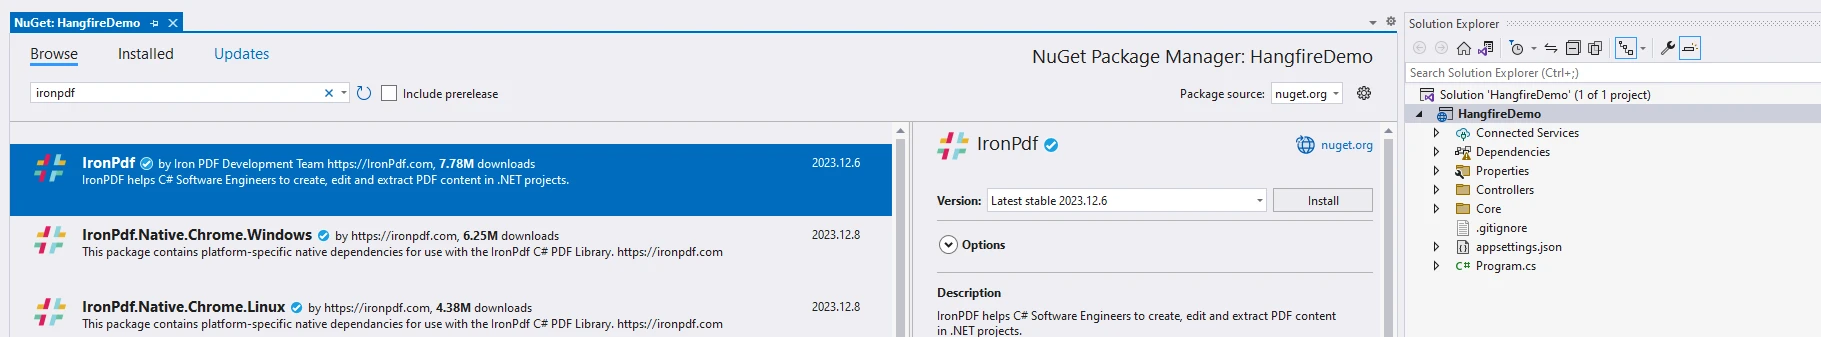 C# Thread Sleep Method (How It Works For Developers): Figure 2 - Install IronPDF using NuGet Package Manager by searching "ironpdf" in the search bar of NuGet Package Manager.